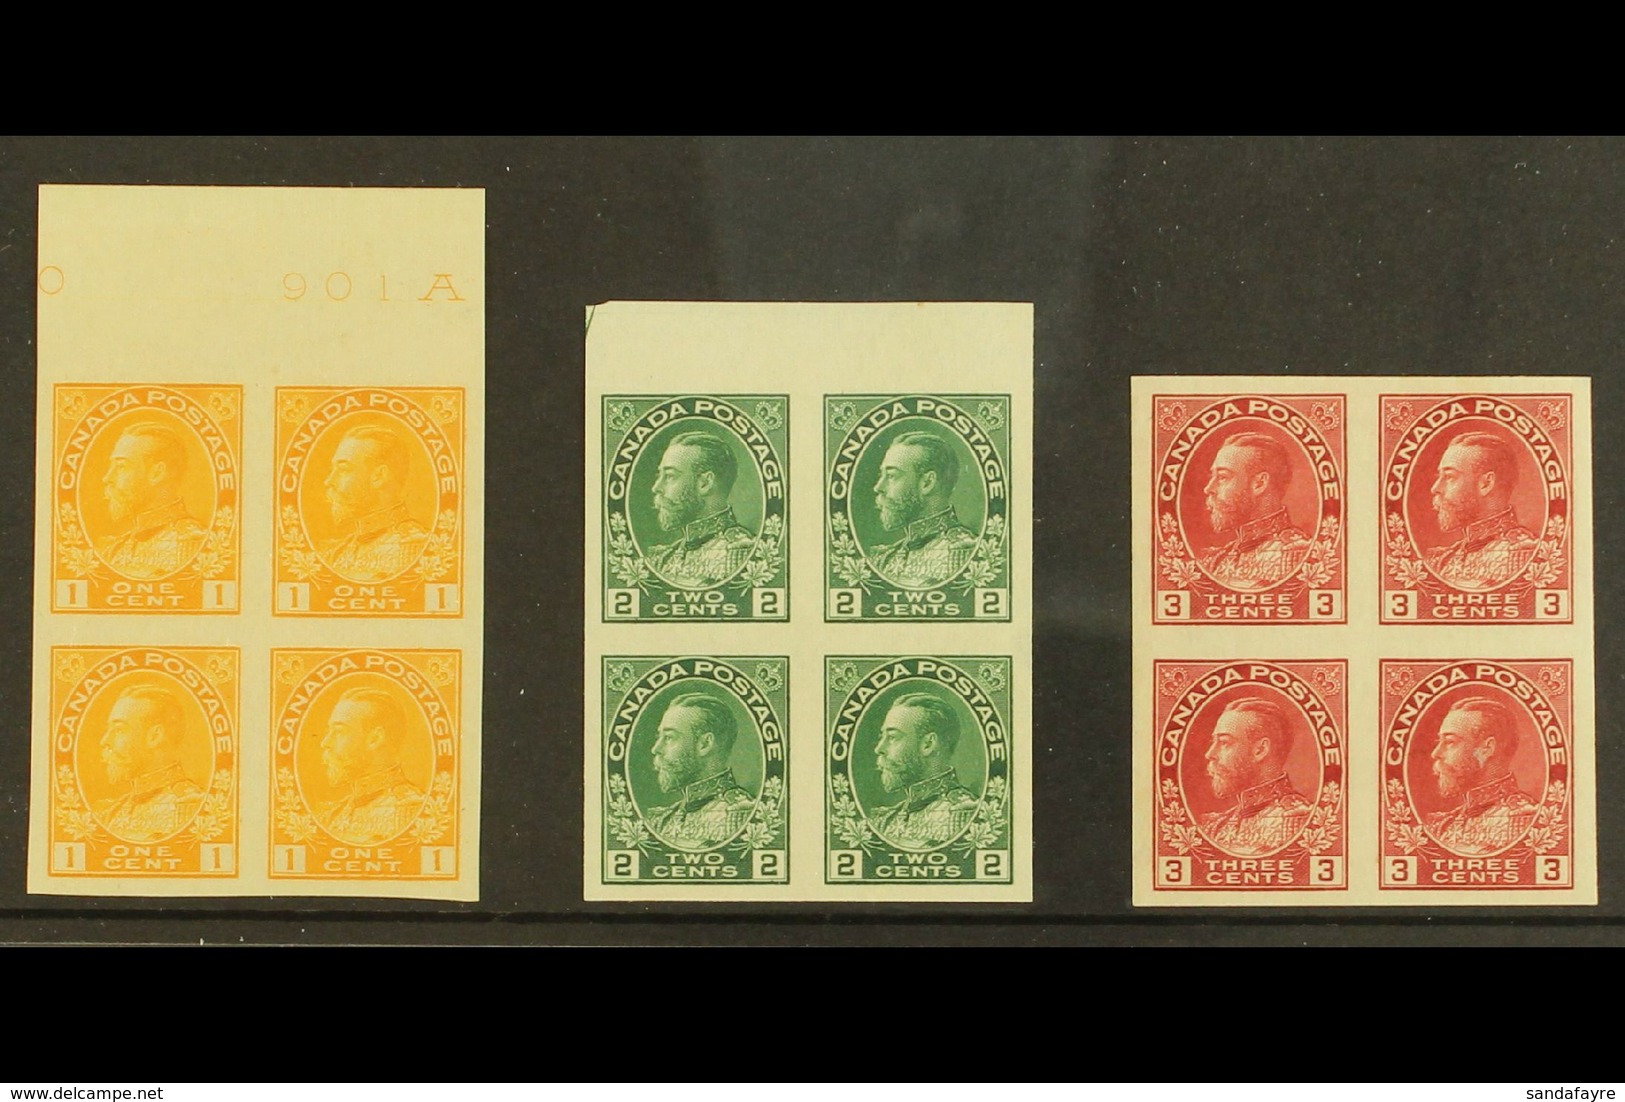 1922-31 1c Chrome, 2c Deep Green And 3c Carmine In Imperf Pairs, SG 259/61, As Very Fine  Mint Blocks Of 4, 2 NHM, 2 Tra - Mauritius (...-1967)